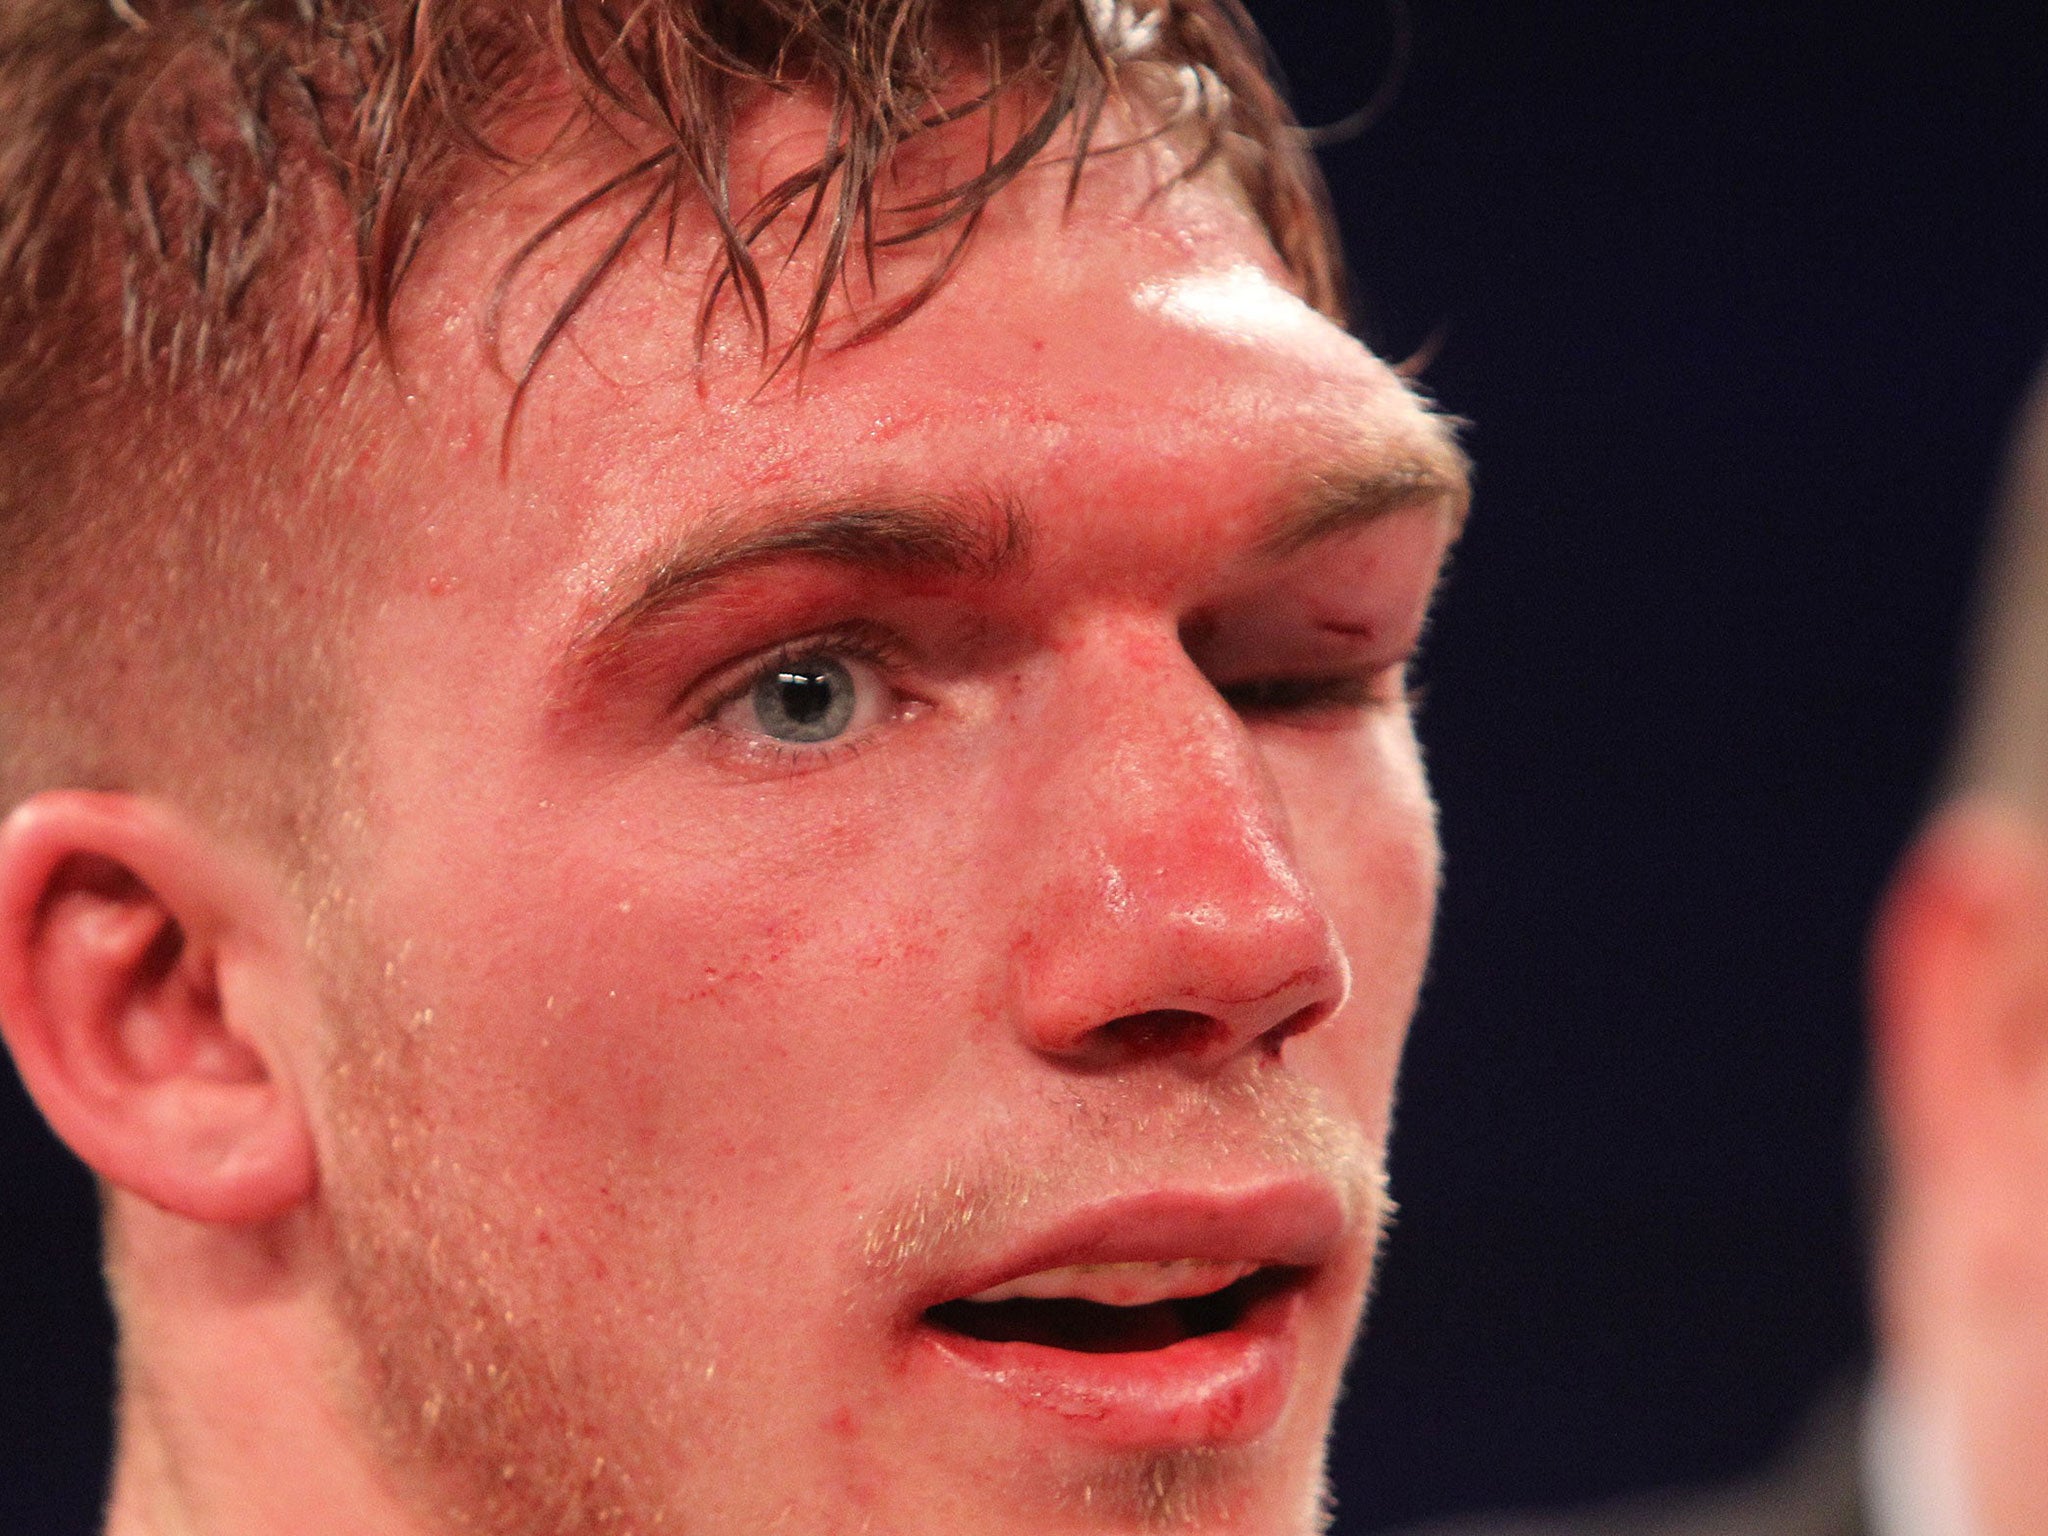 &#13;
Blackwell suffered the original injury in a fight against Eubank Jnr &#13;